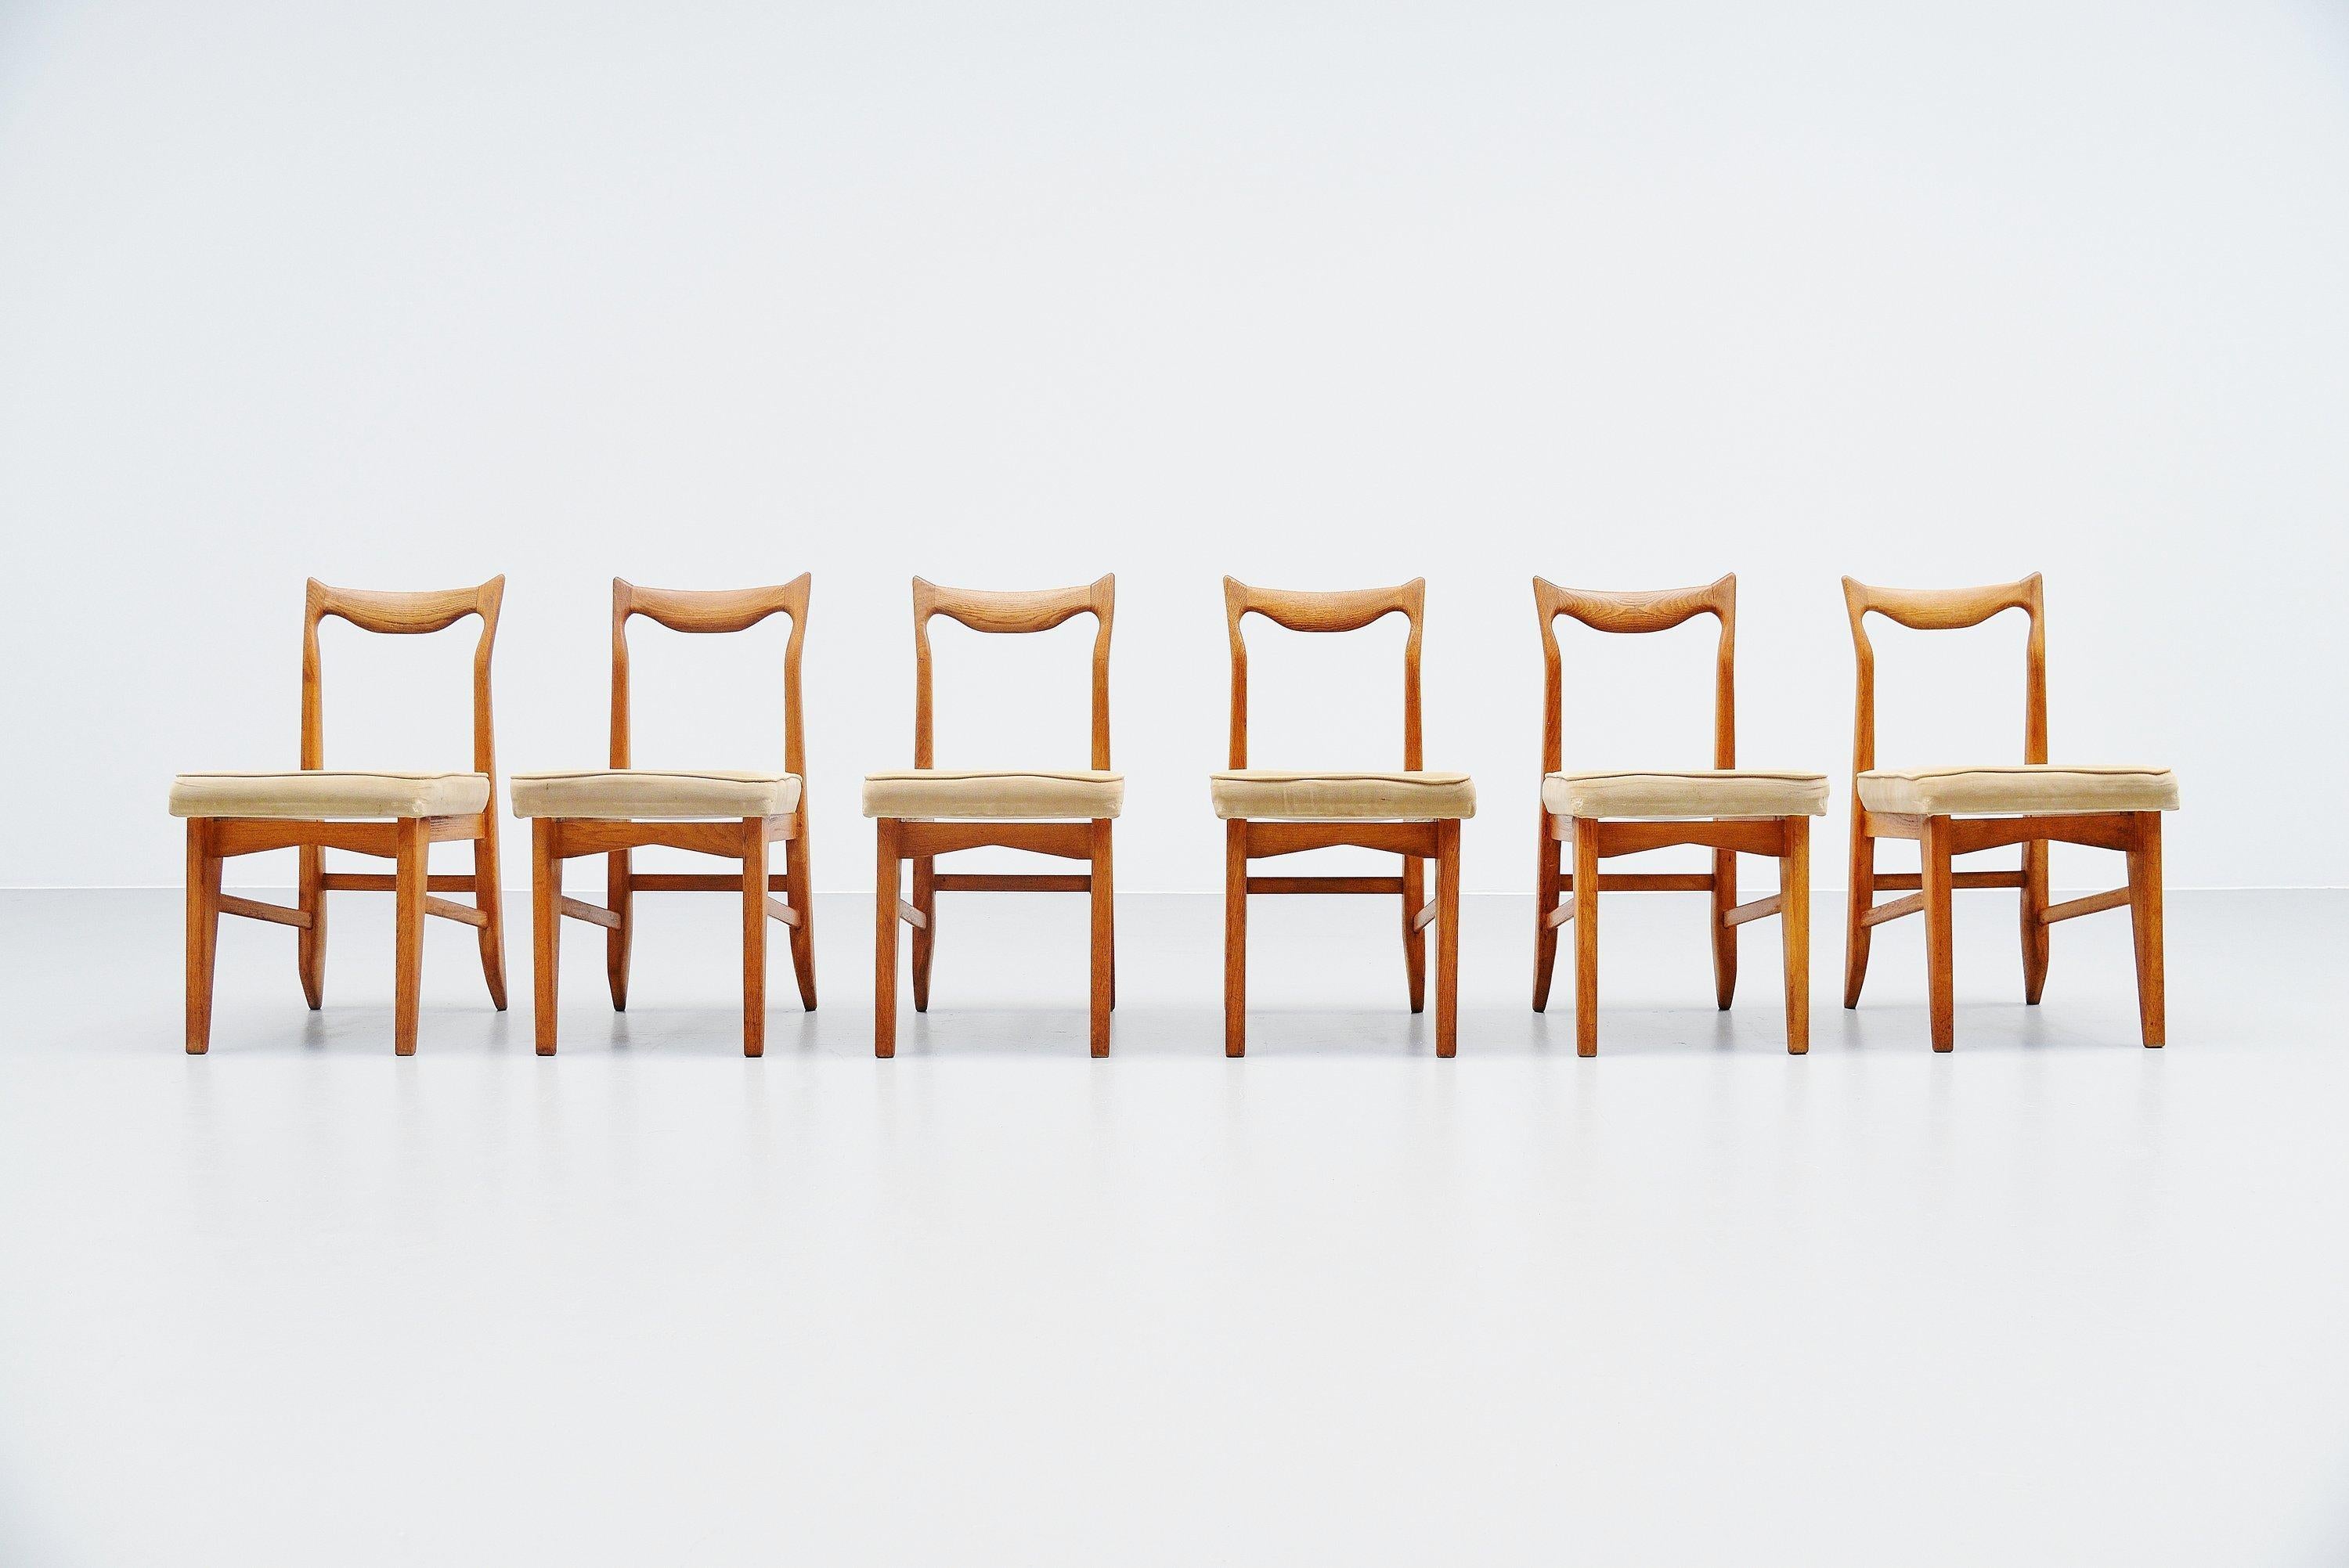 Set of 6 dining chairs designed by designer duo Robert Guillerme and Jacques Chambron, France 1950. The pieces were made in their own workshop and they made furniture from the 1950s to the 1970s. Mainly in solid oak and differently upholstery